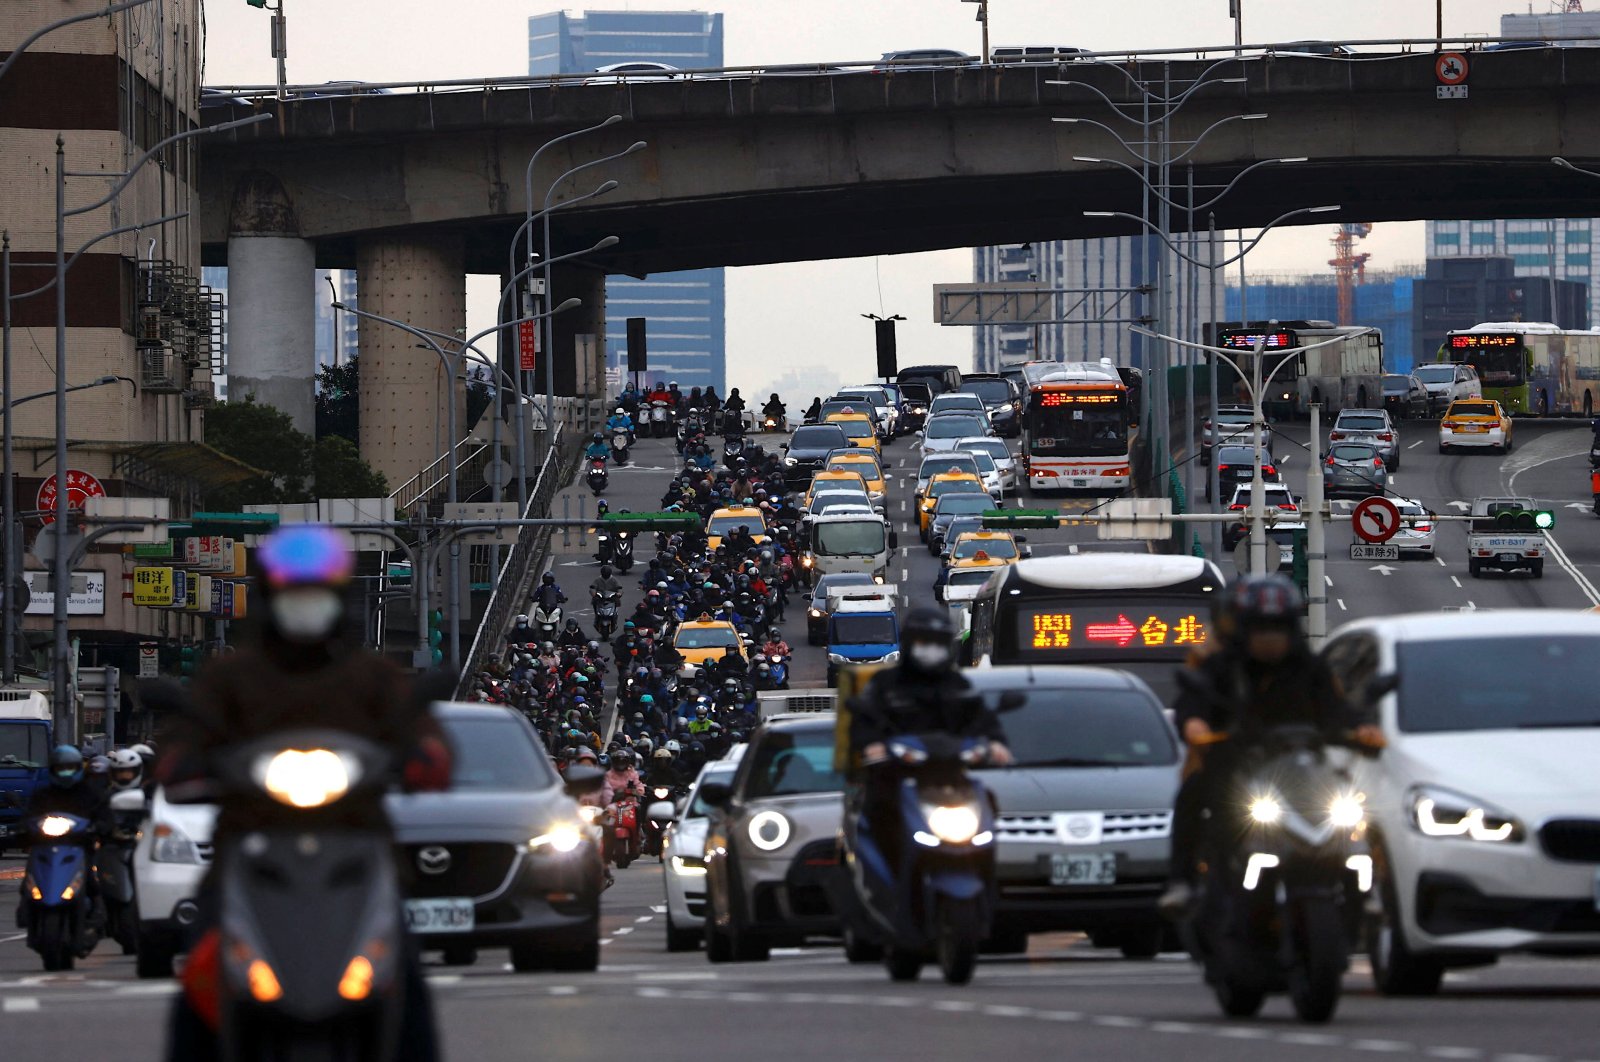 A general view of the rush hour traffic in Taipei, Taiwan, Jan. 17, 2023. (Reuters Photo)